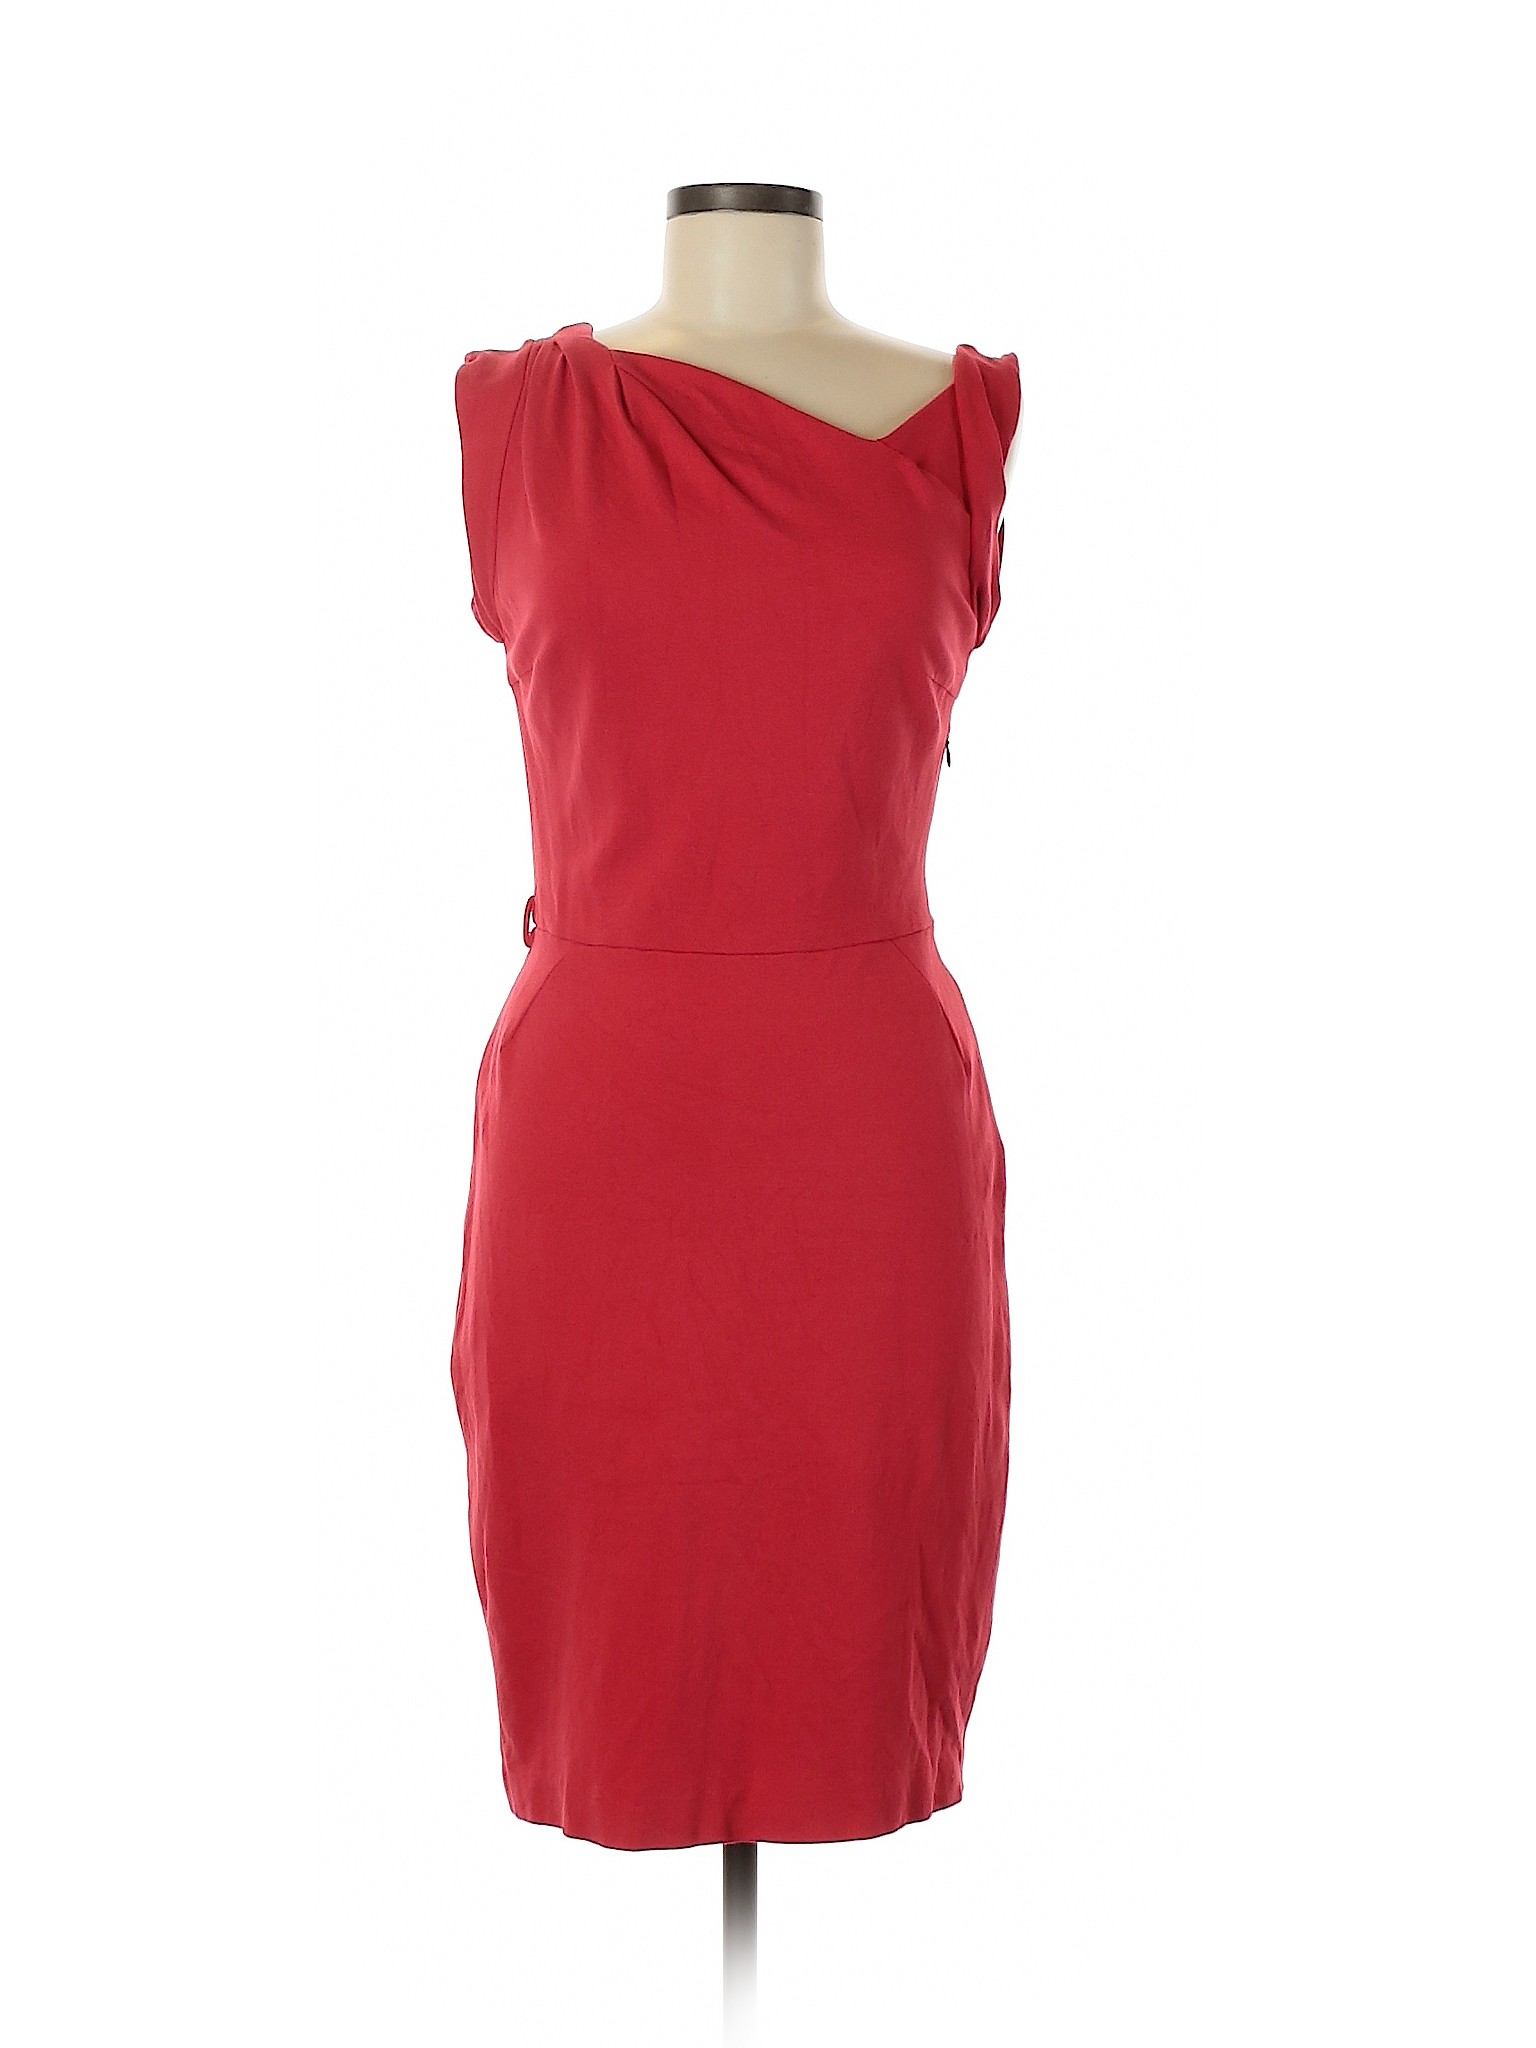 Mango Solid Red Casual Dress Size M - 85% off | thredUP